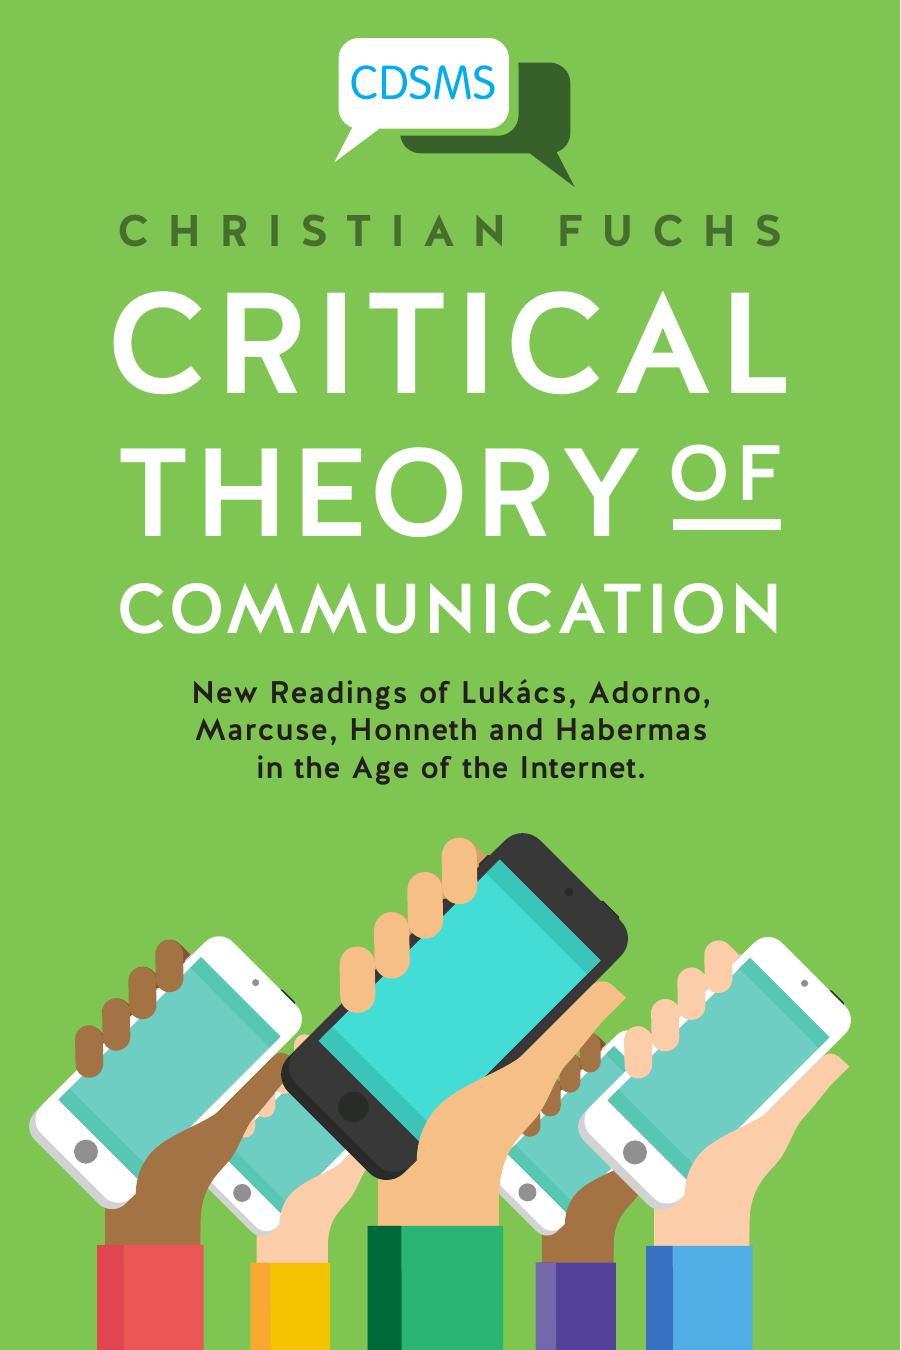 Critical Theory of Communication: New Readings of Lukács, Adorno, Marcuse, Honneth and Habermas in the Age of the Internet